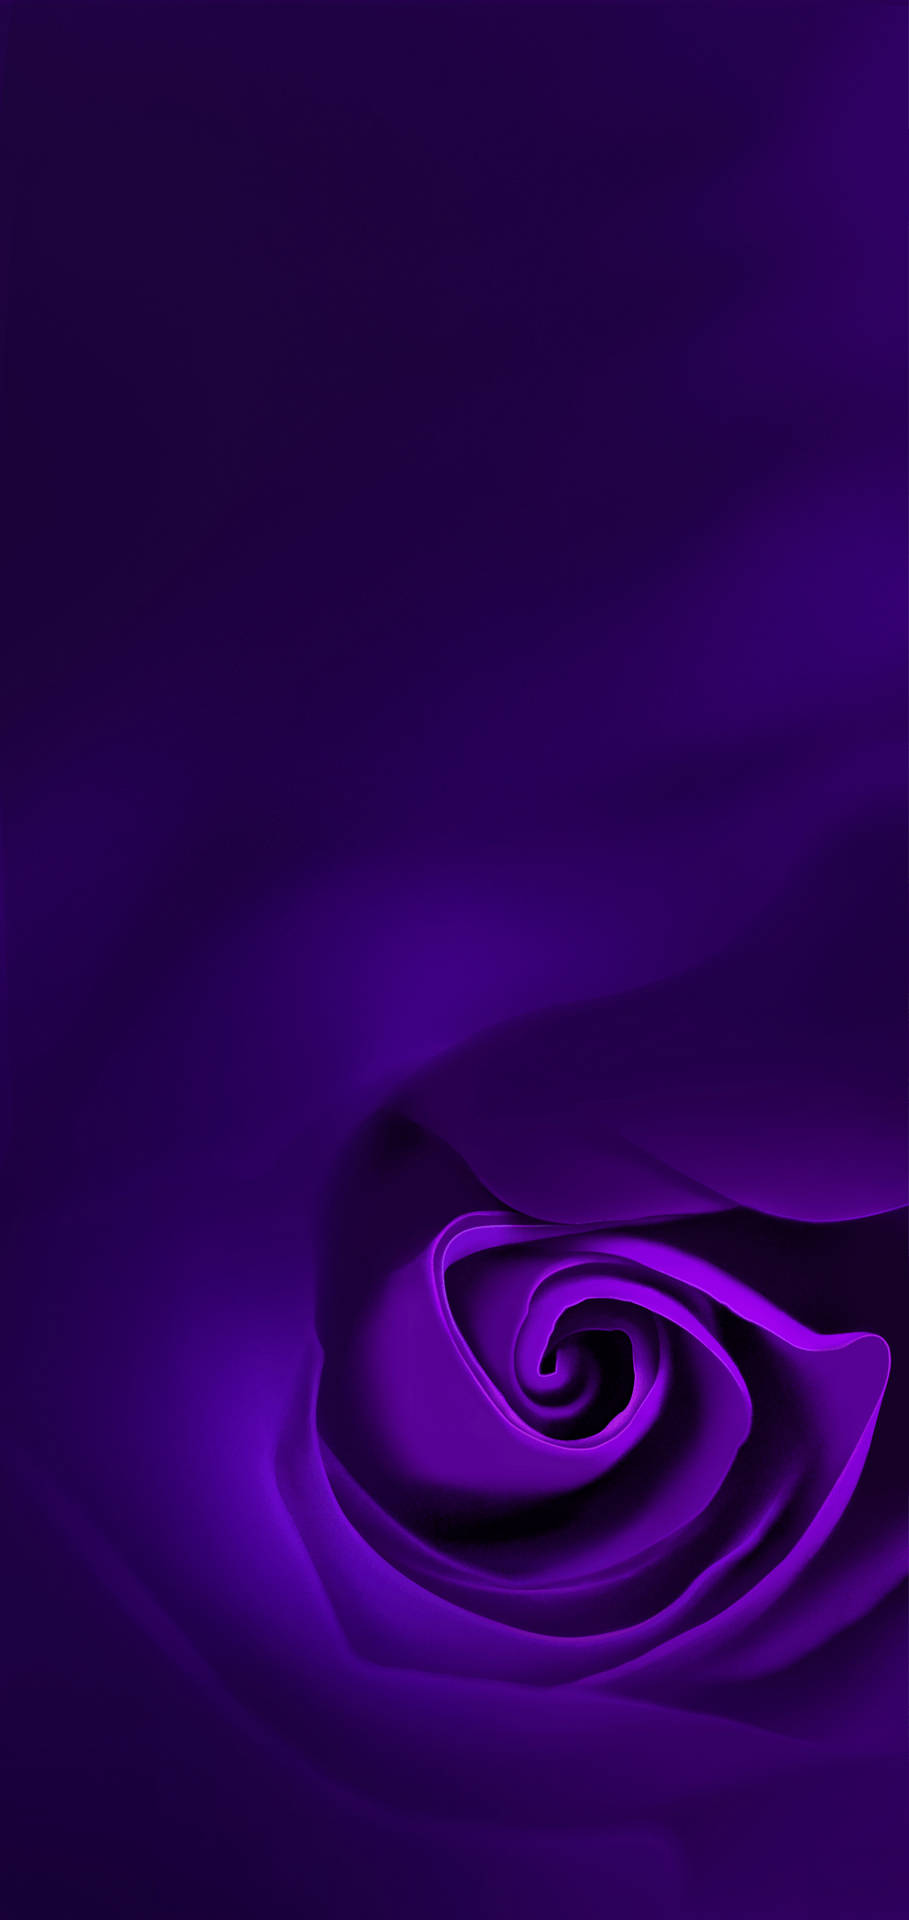 Exquisite Abstract Violet Rose Wallpaper for Oppo A5s Wallpaper